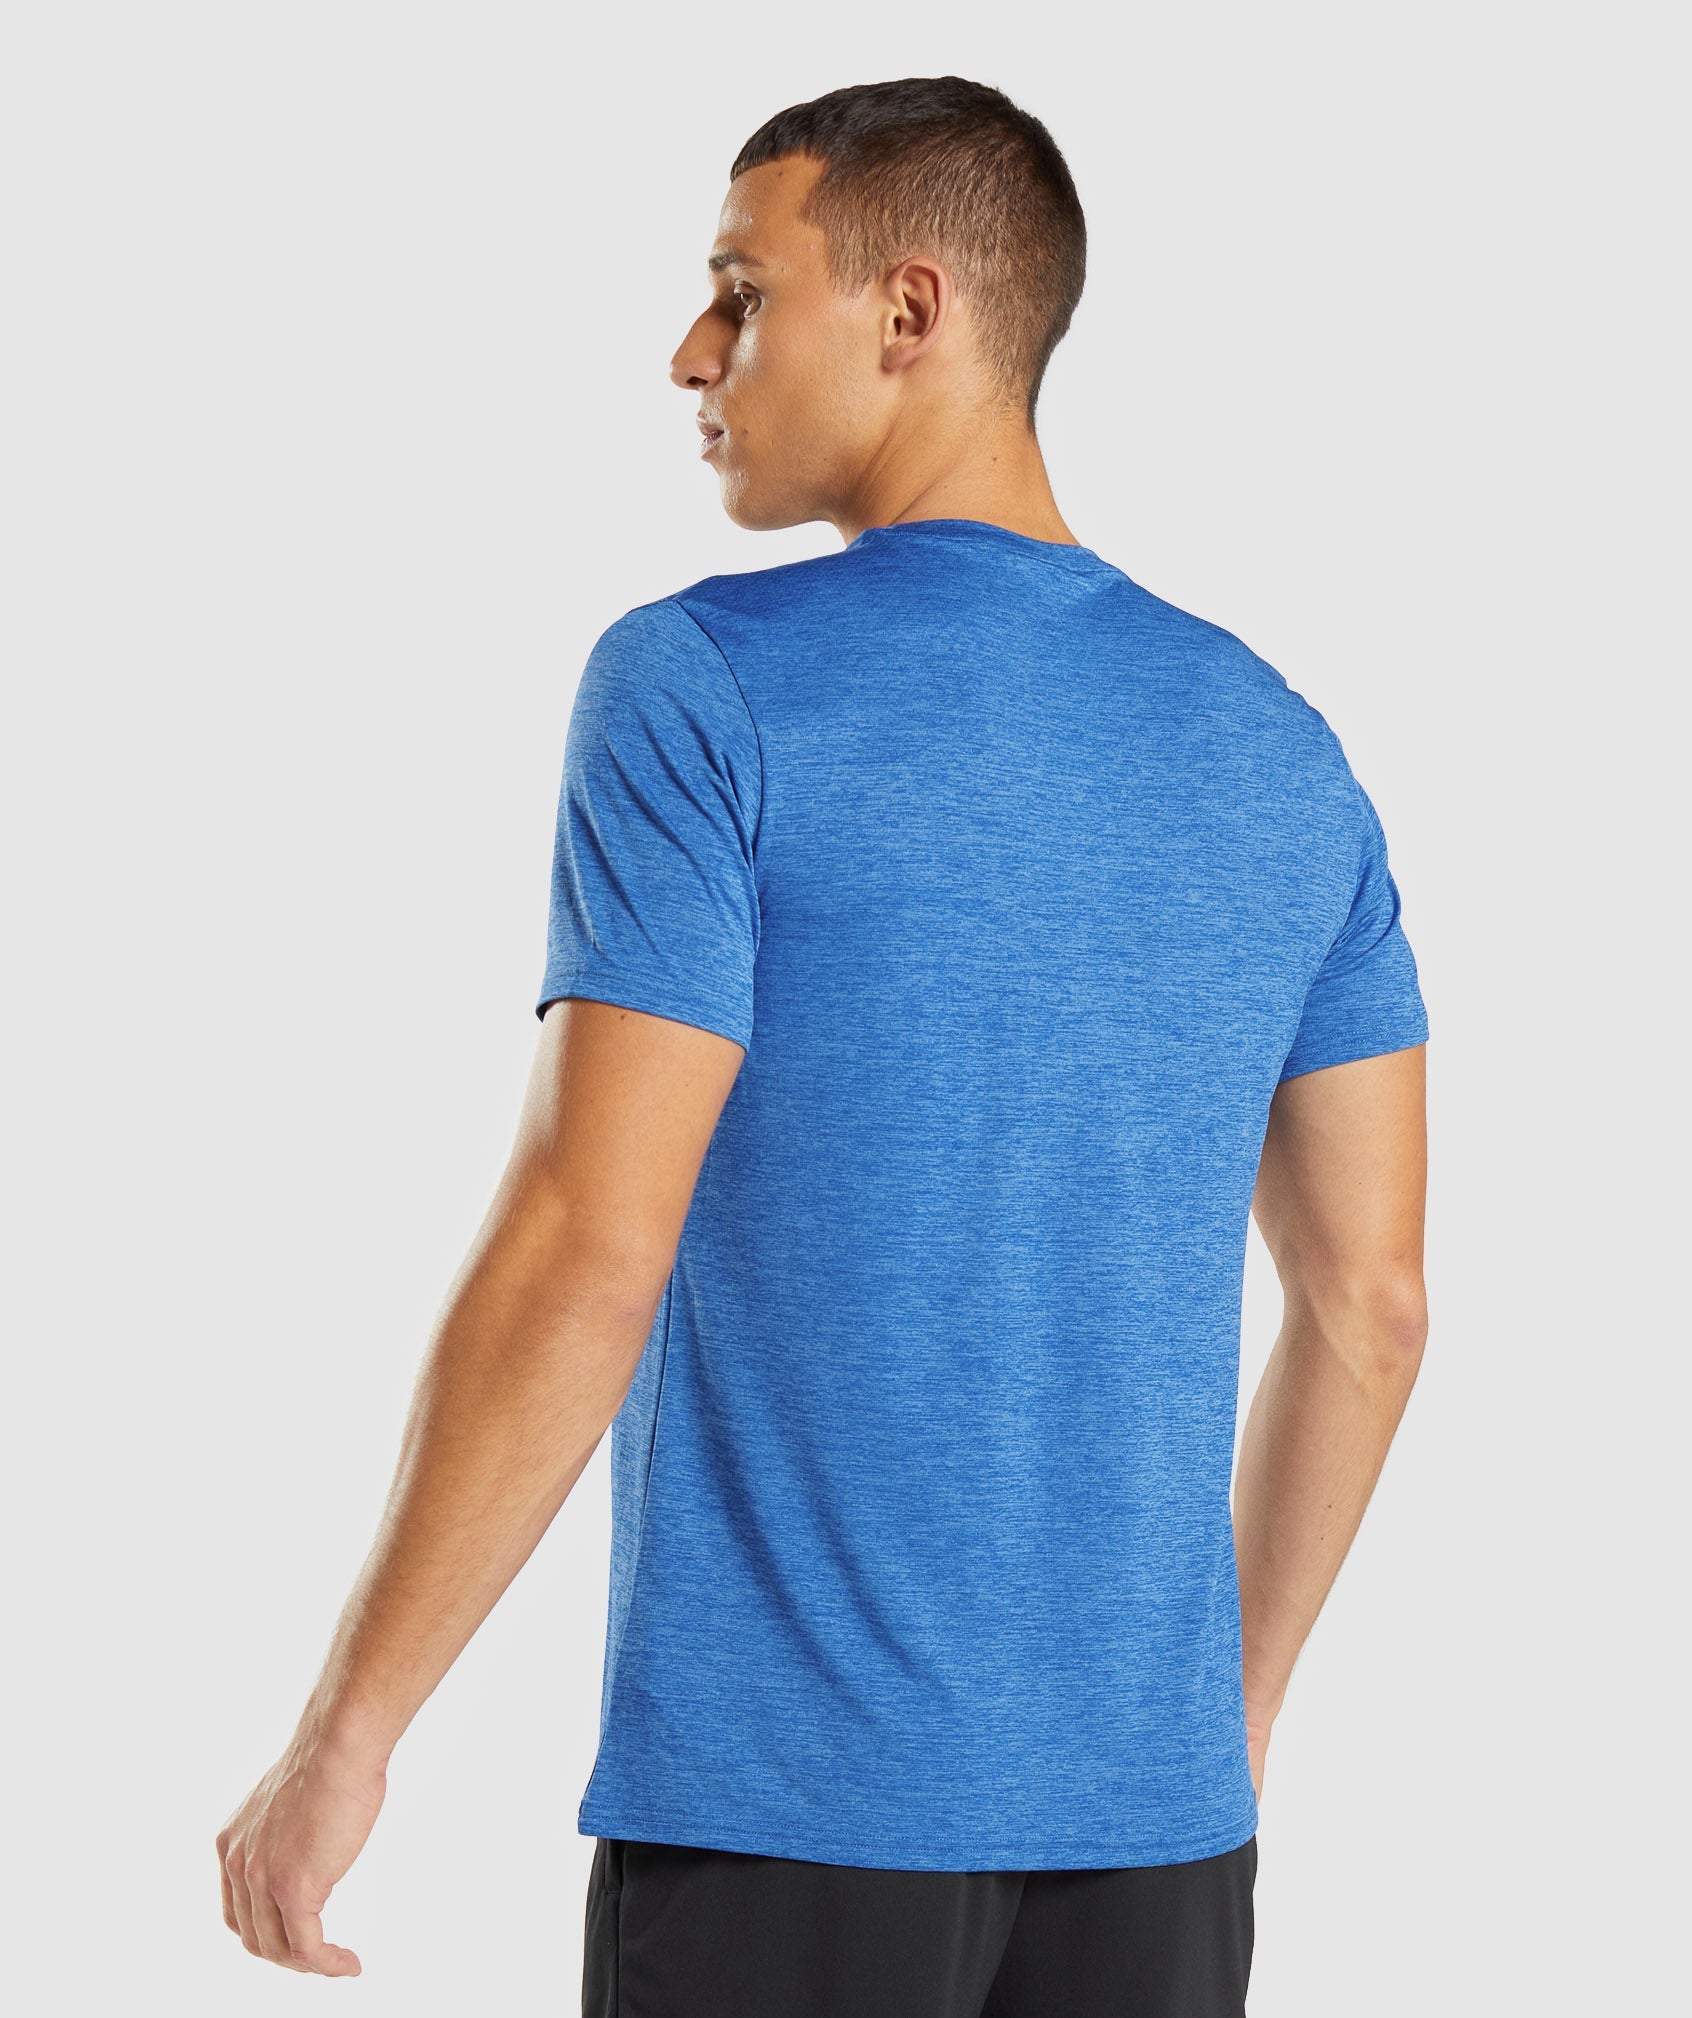 Arrival Marl T-Shirt in Athletic Blue/Javelin Blue Marl - view 2